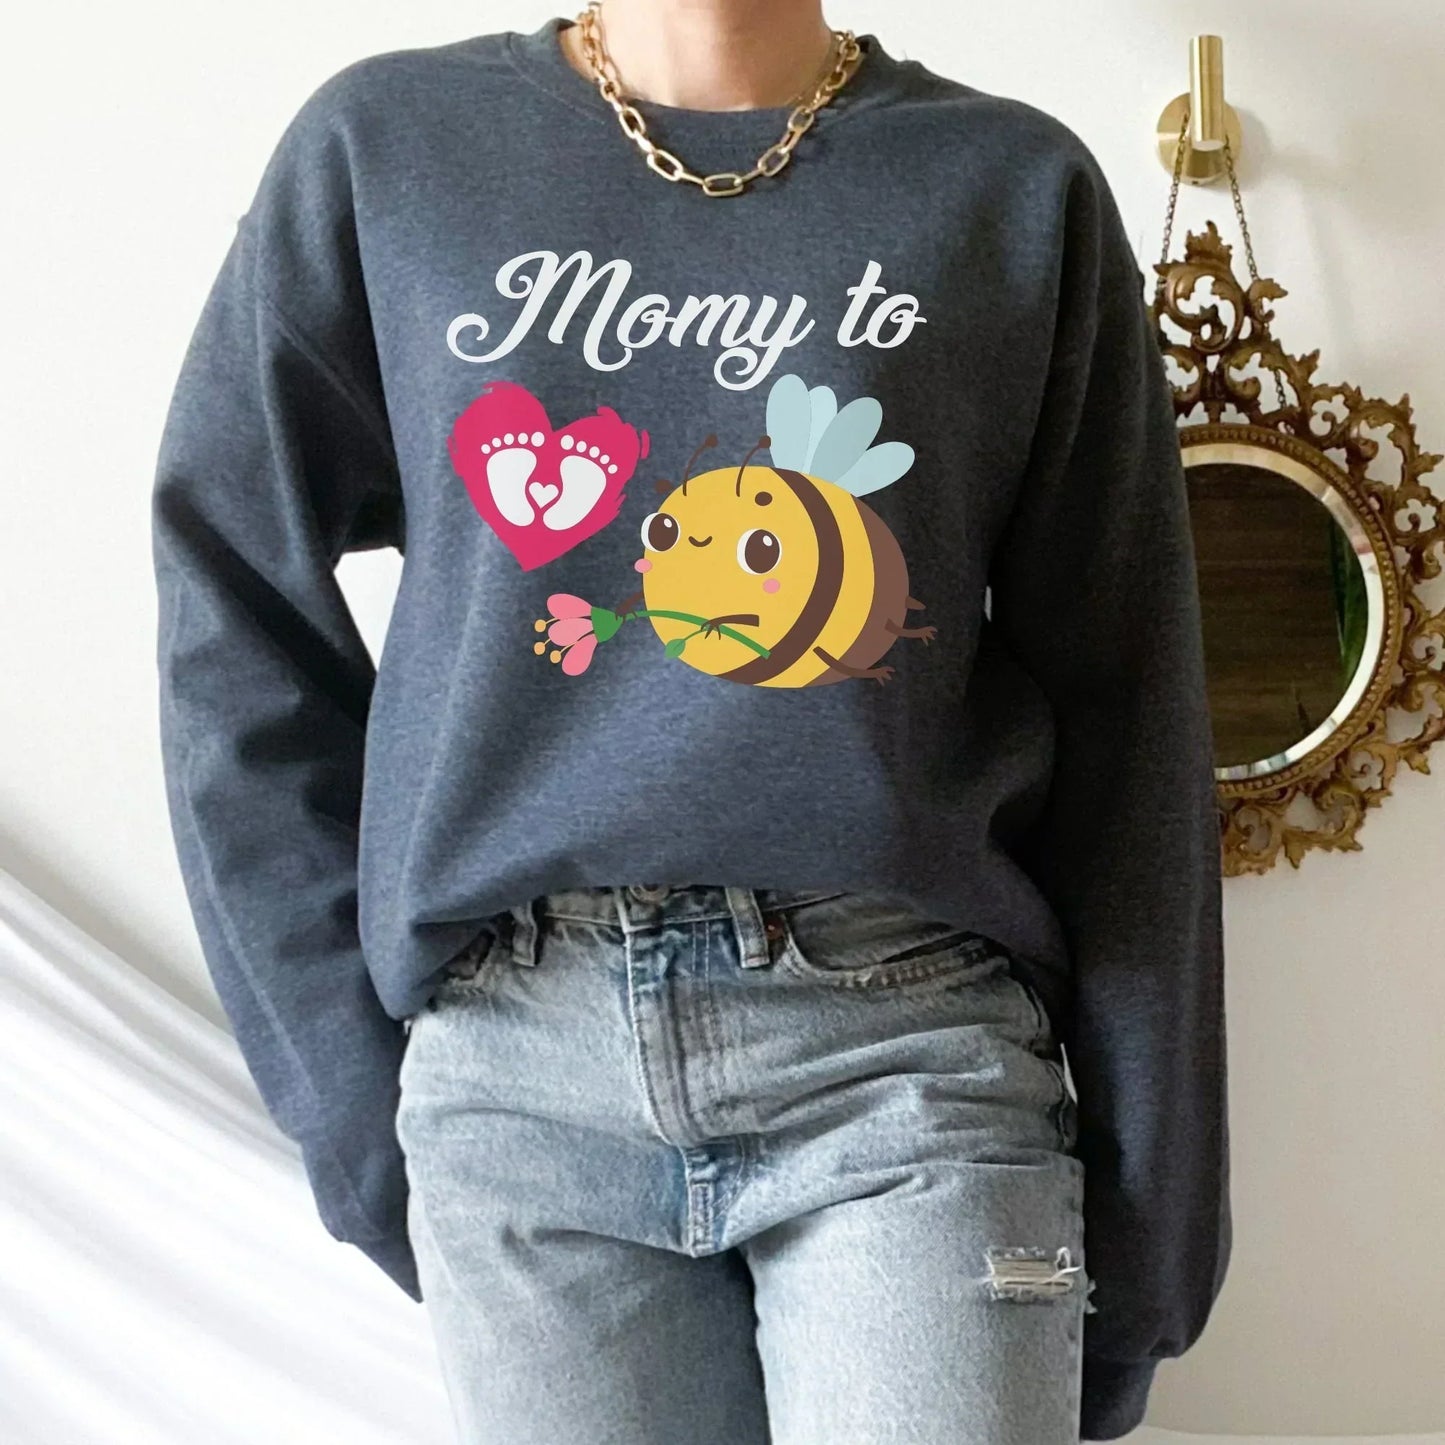 Pregnancy sweatshirt, Maternity shirt, Bumble Bee Pregnancy Reveal to Husband, Soon to Be Mom, Expecting Mother Hoodie, New Baby Coming Soon HMDesignStudioUS